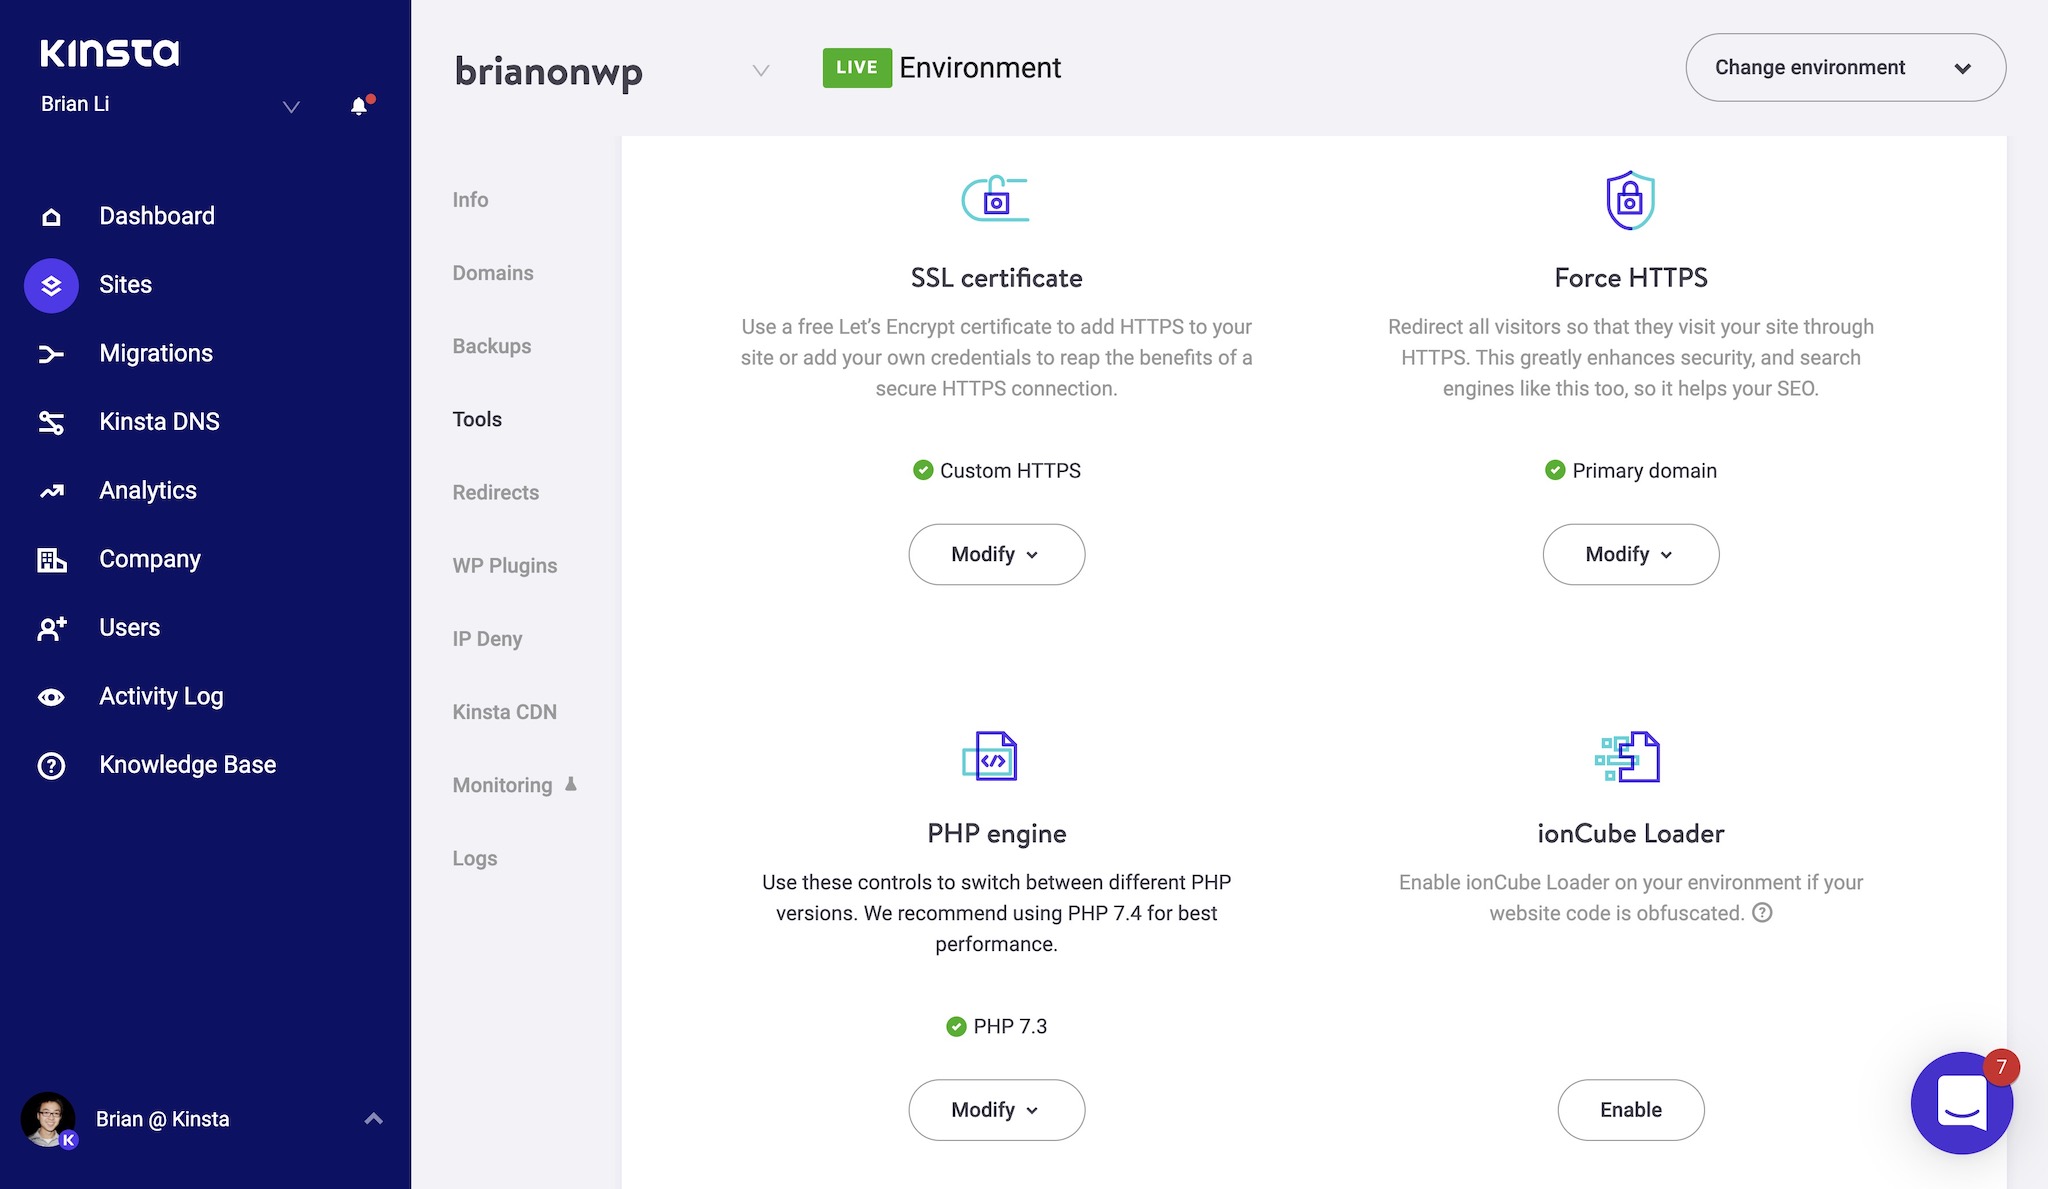 Kinsta has a "Force HTTPS" tool built into its dashboard.